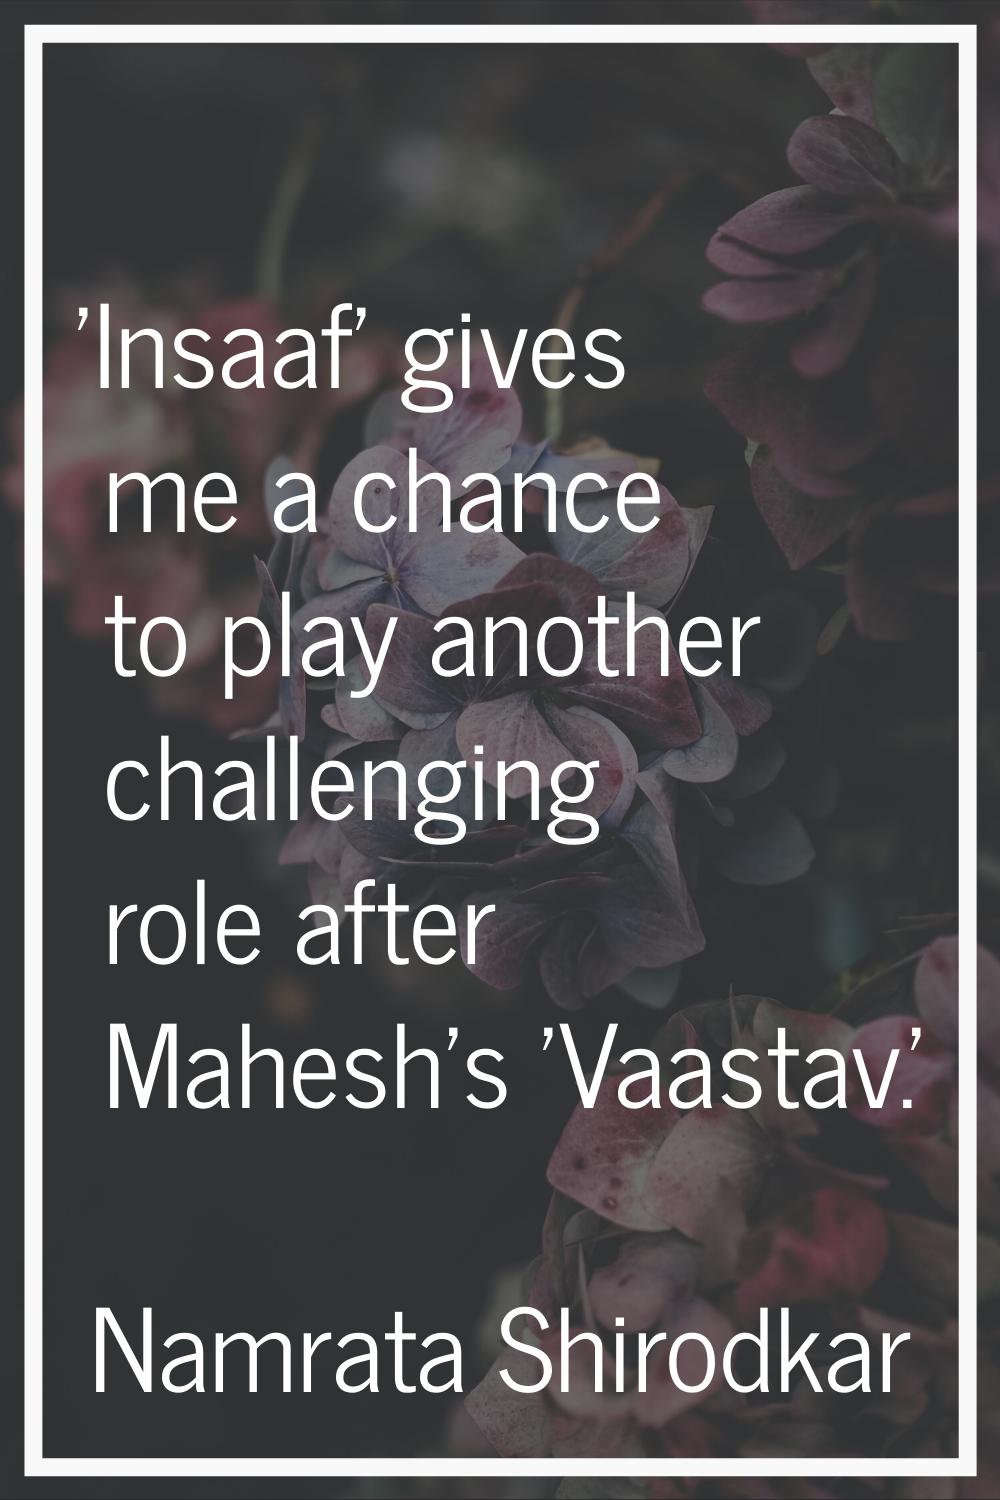 'Insaaf' gives me a chance to play another challenging role after Mahesh's 'Vaastav.'